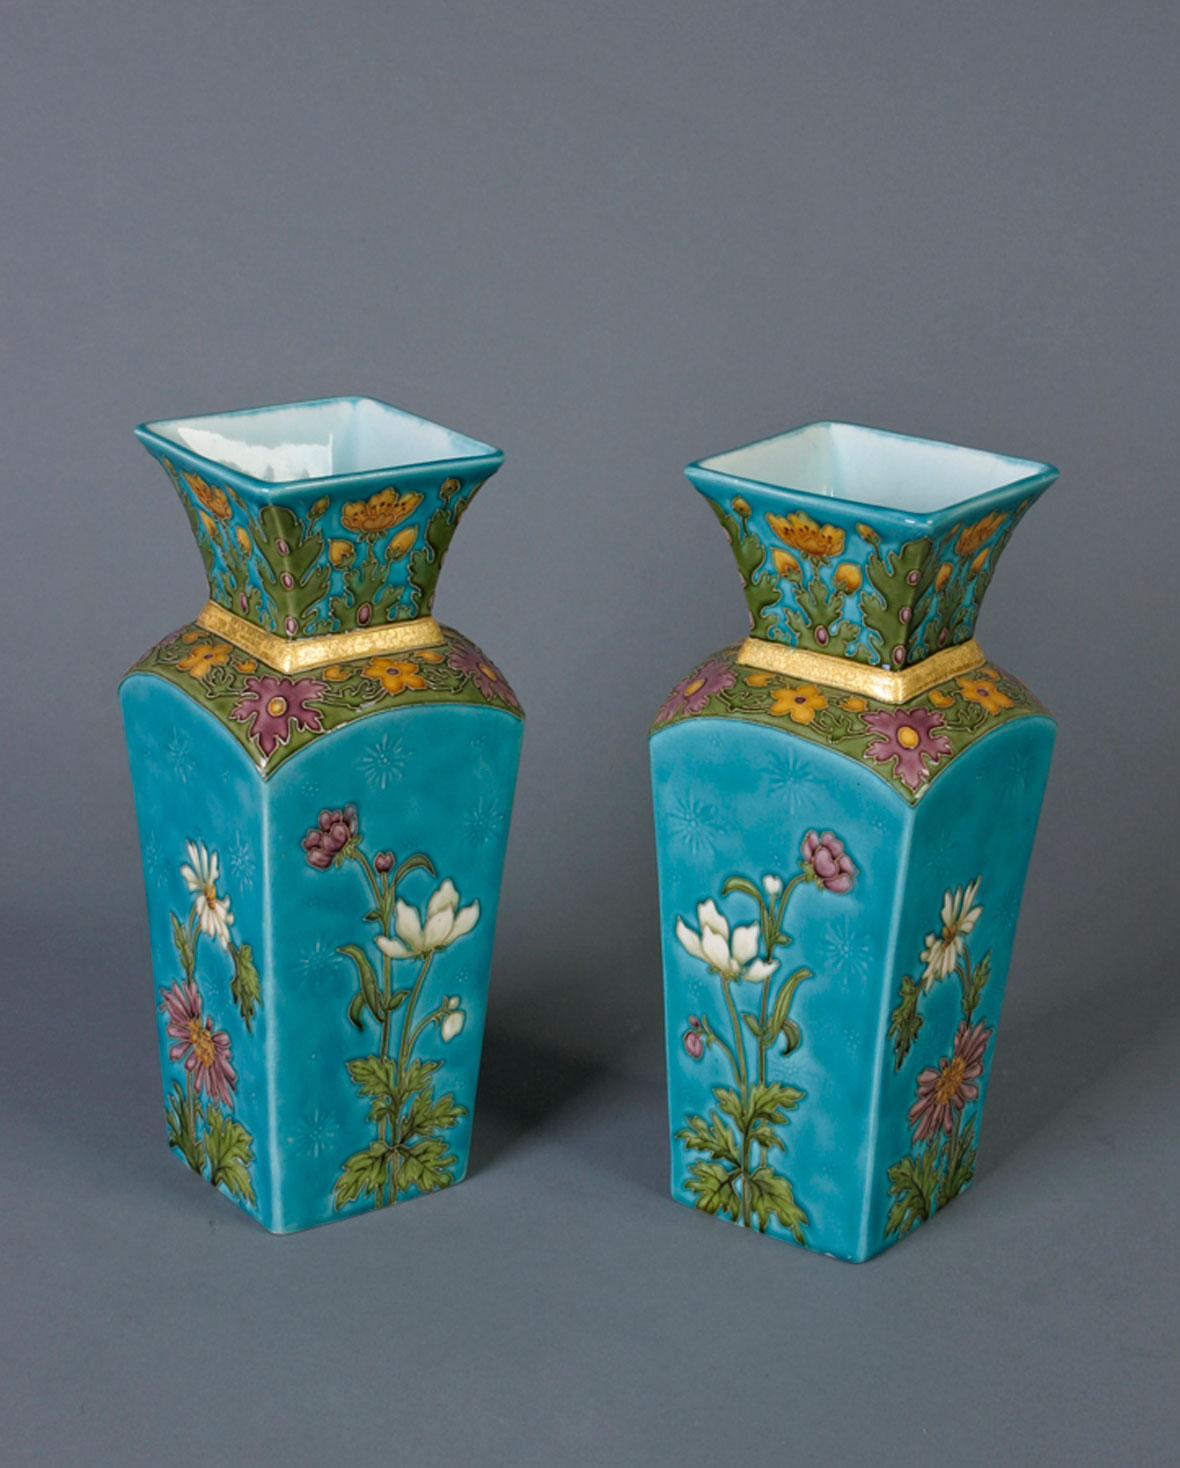 A Pair of Faience Vases by Milet